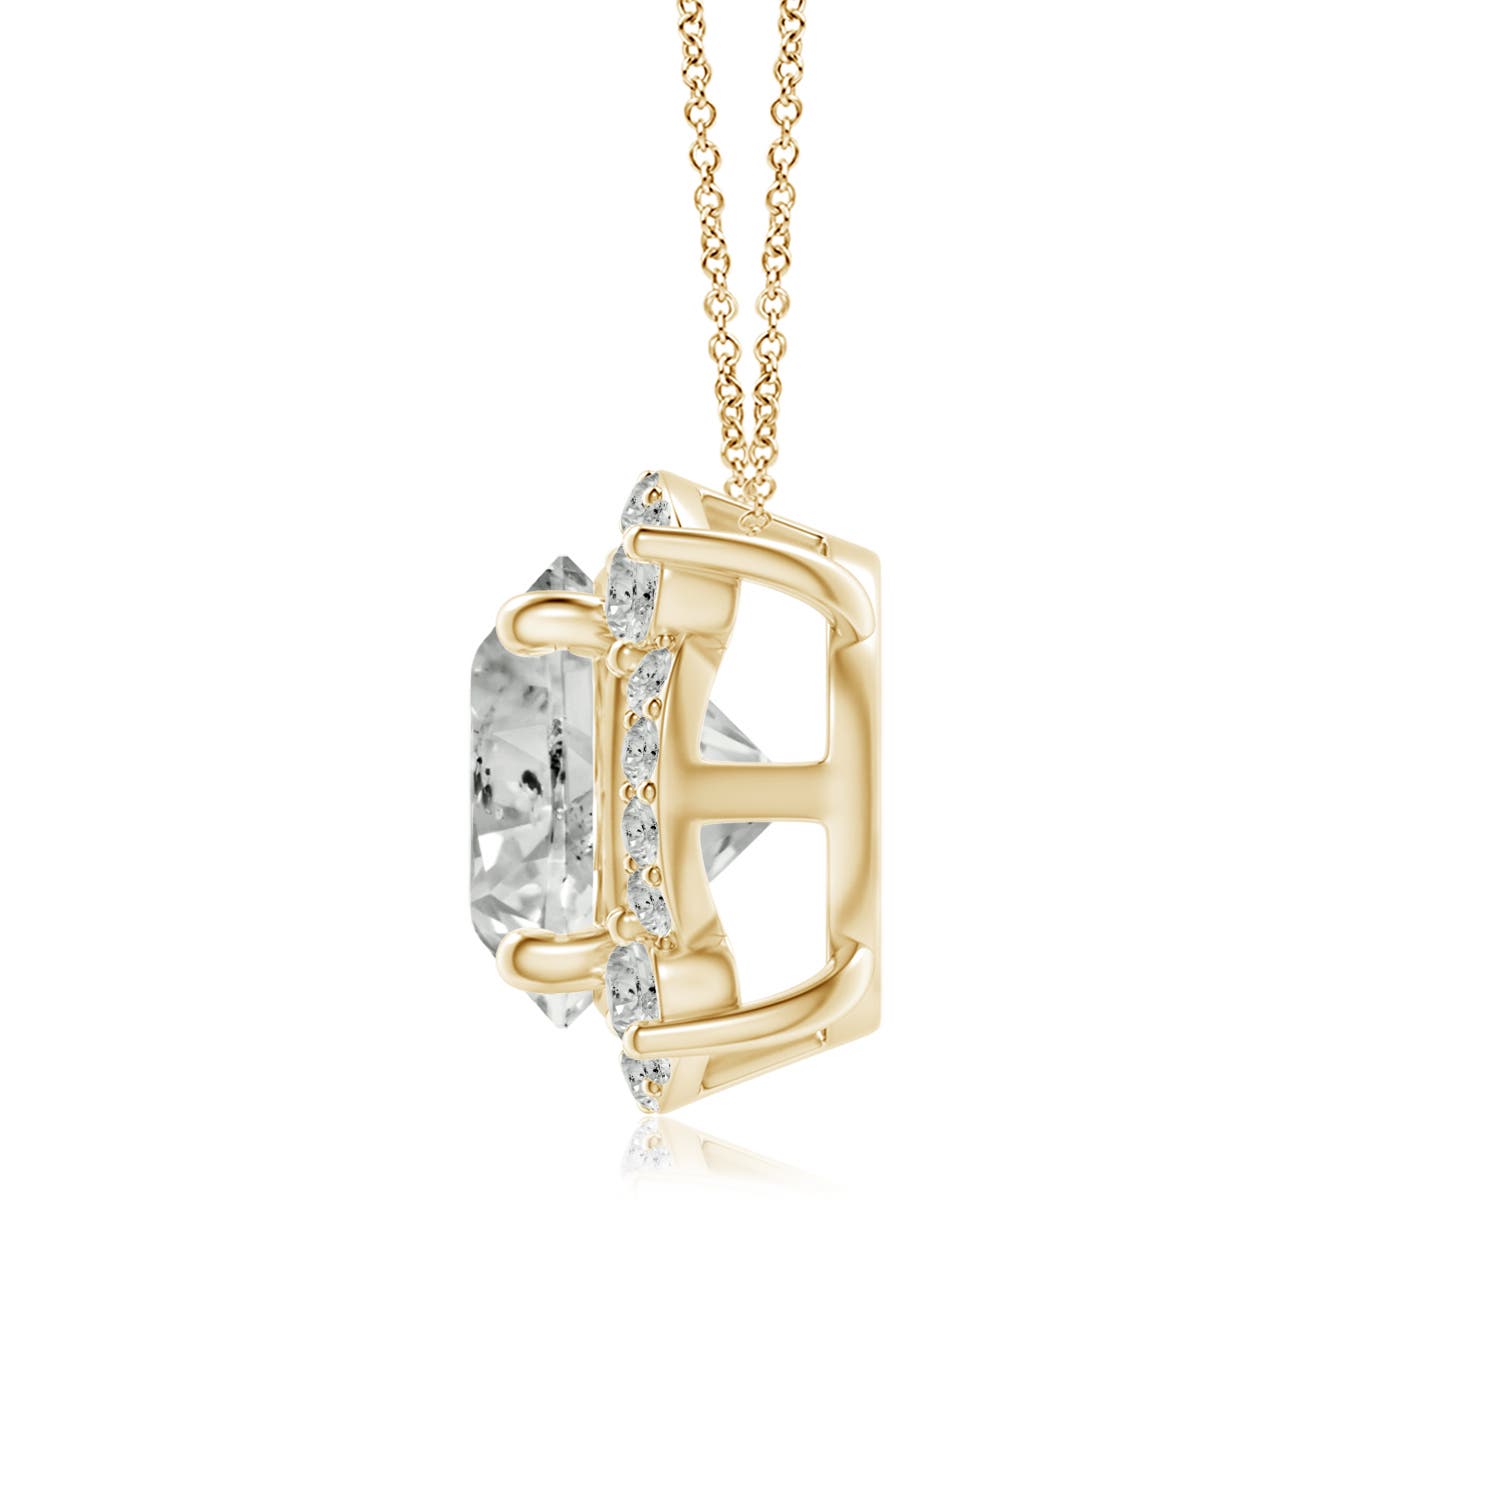 K, I3 / 1.18 CT / 14 KT Yellow Gold